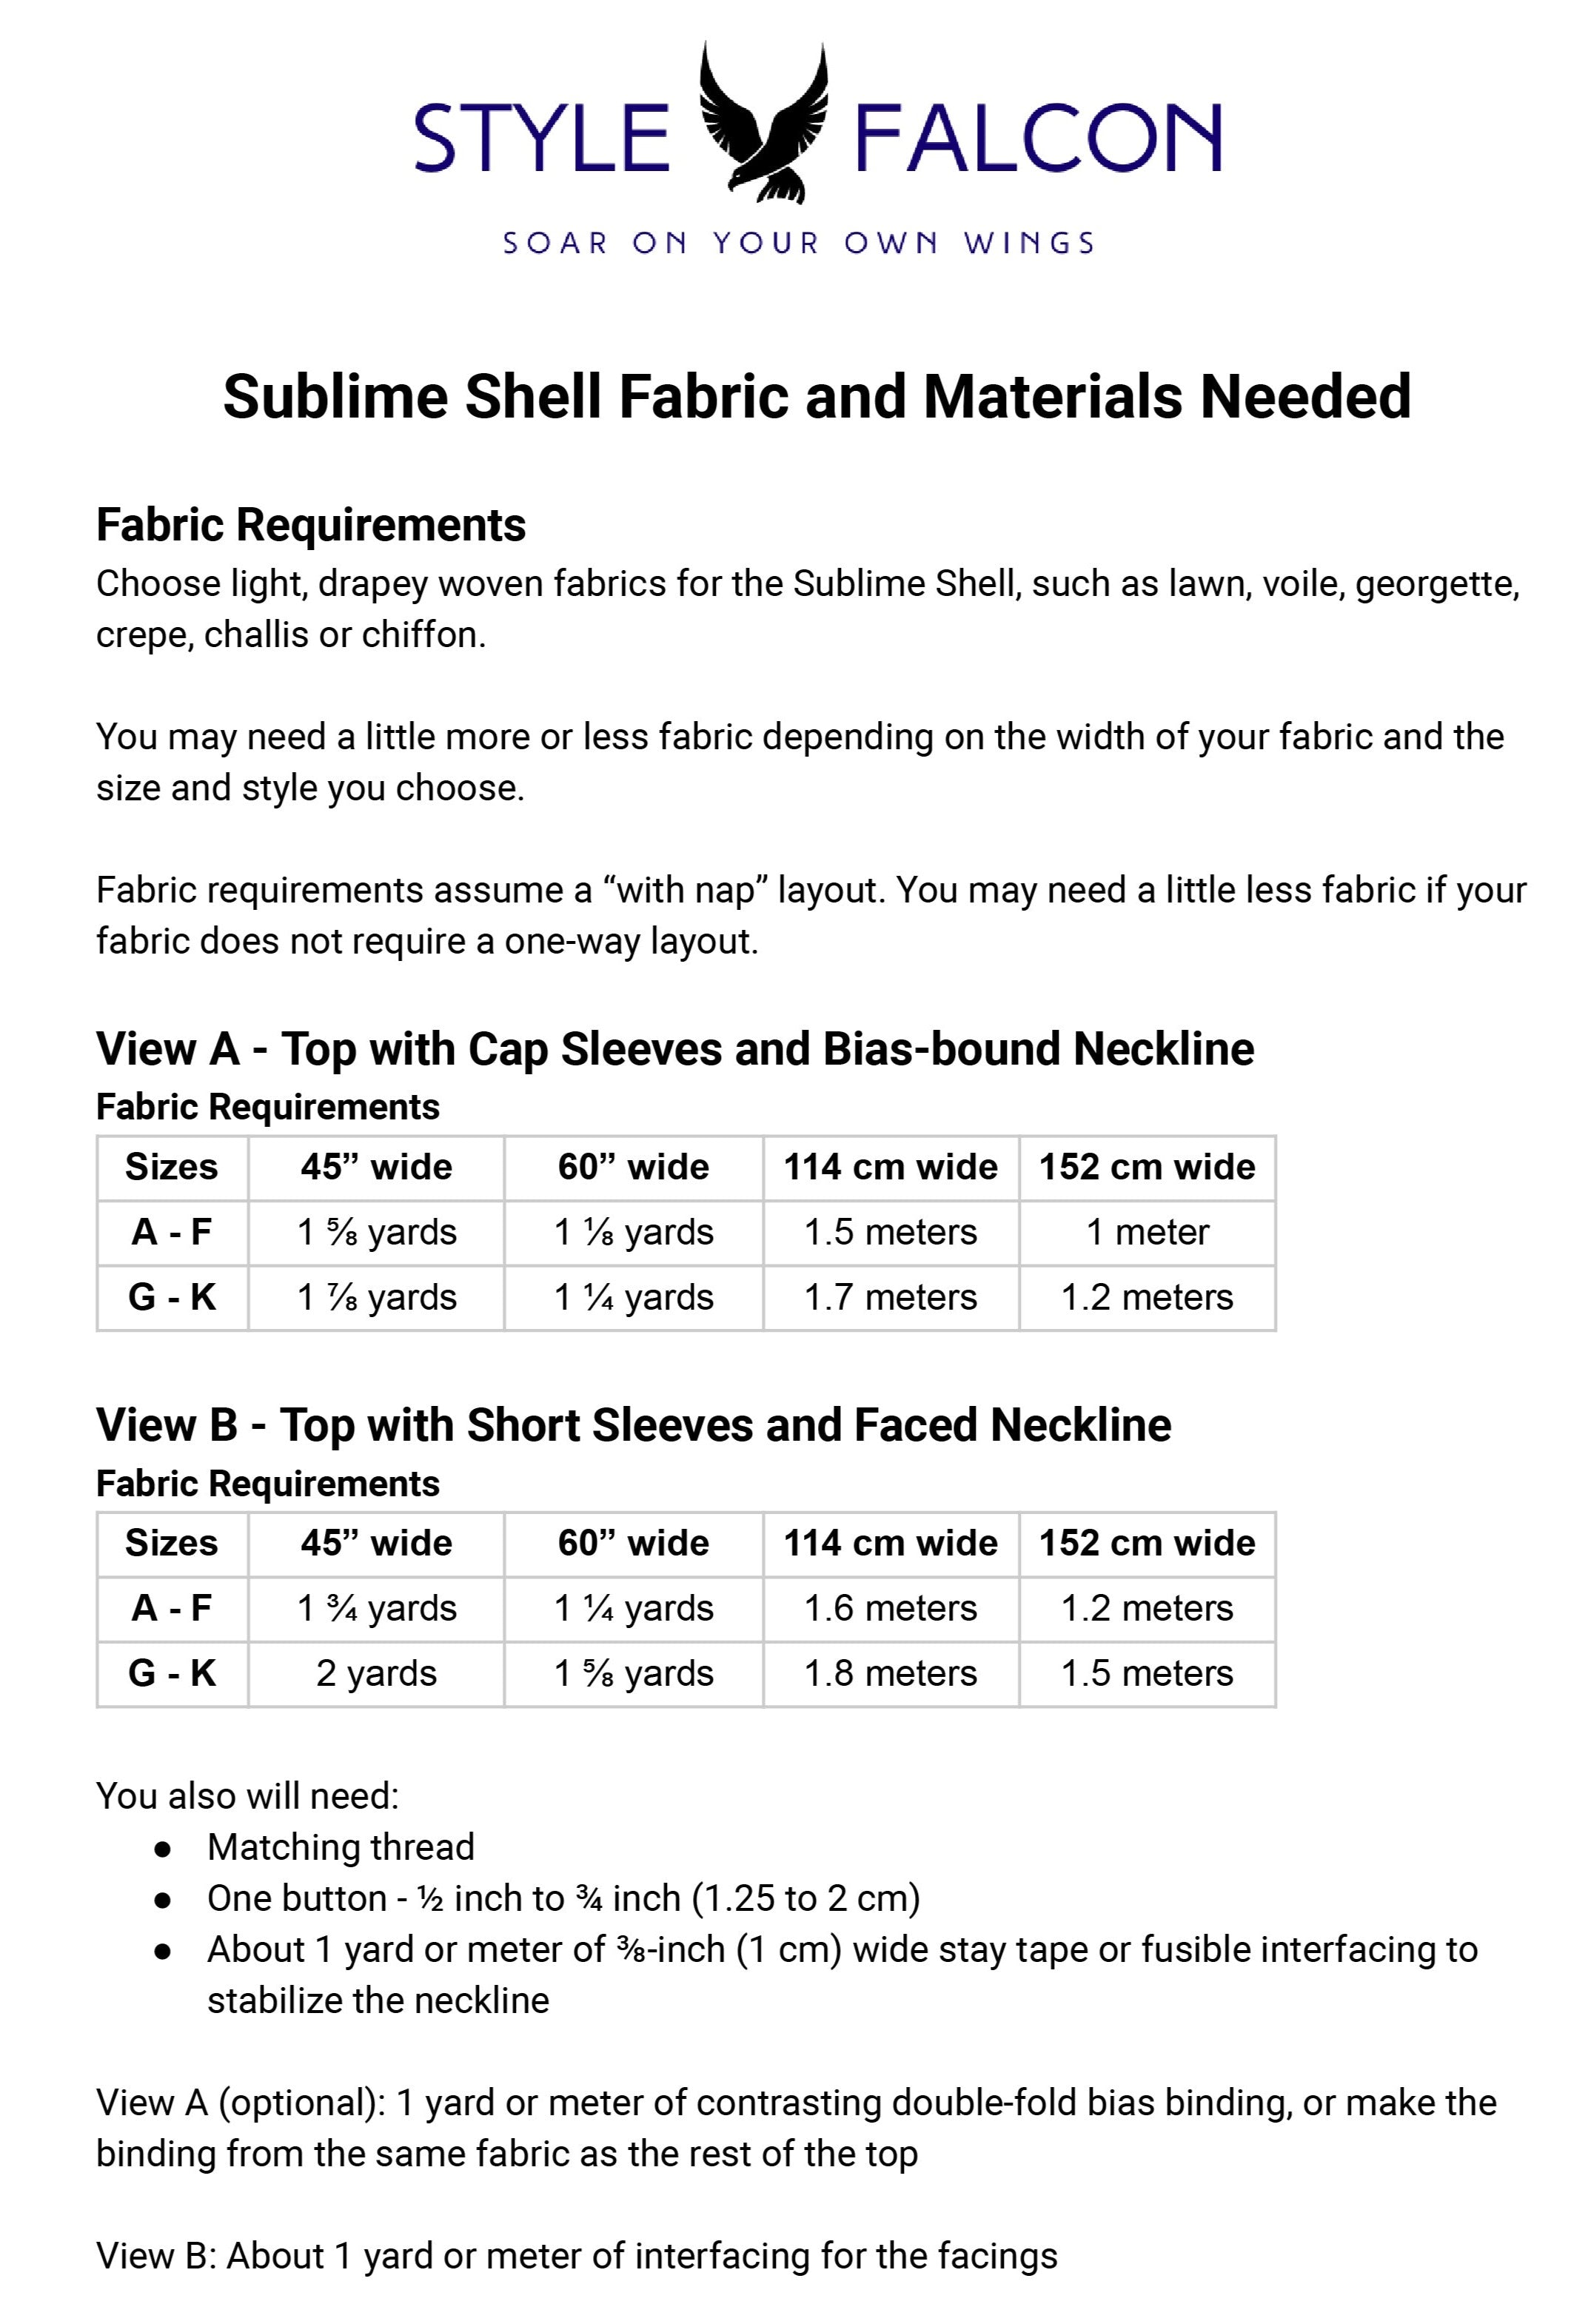 A chart describing the fabric and other materials needed to make the Sublime Shell.